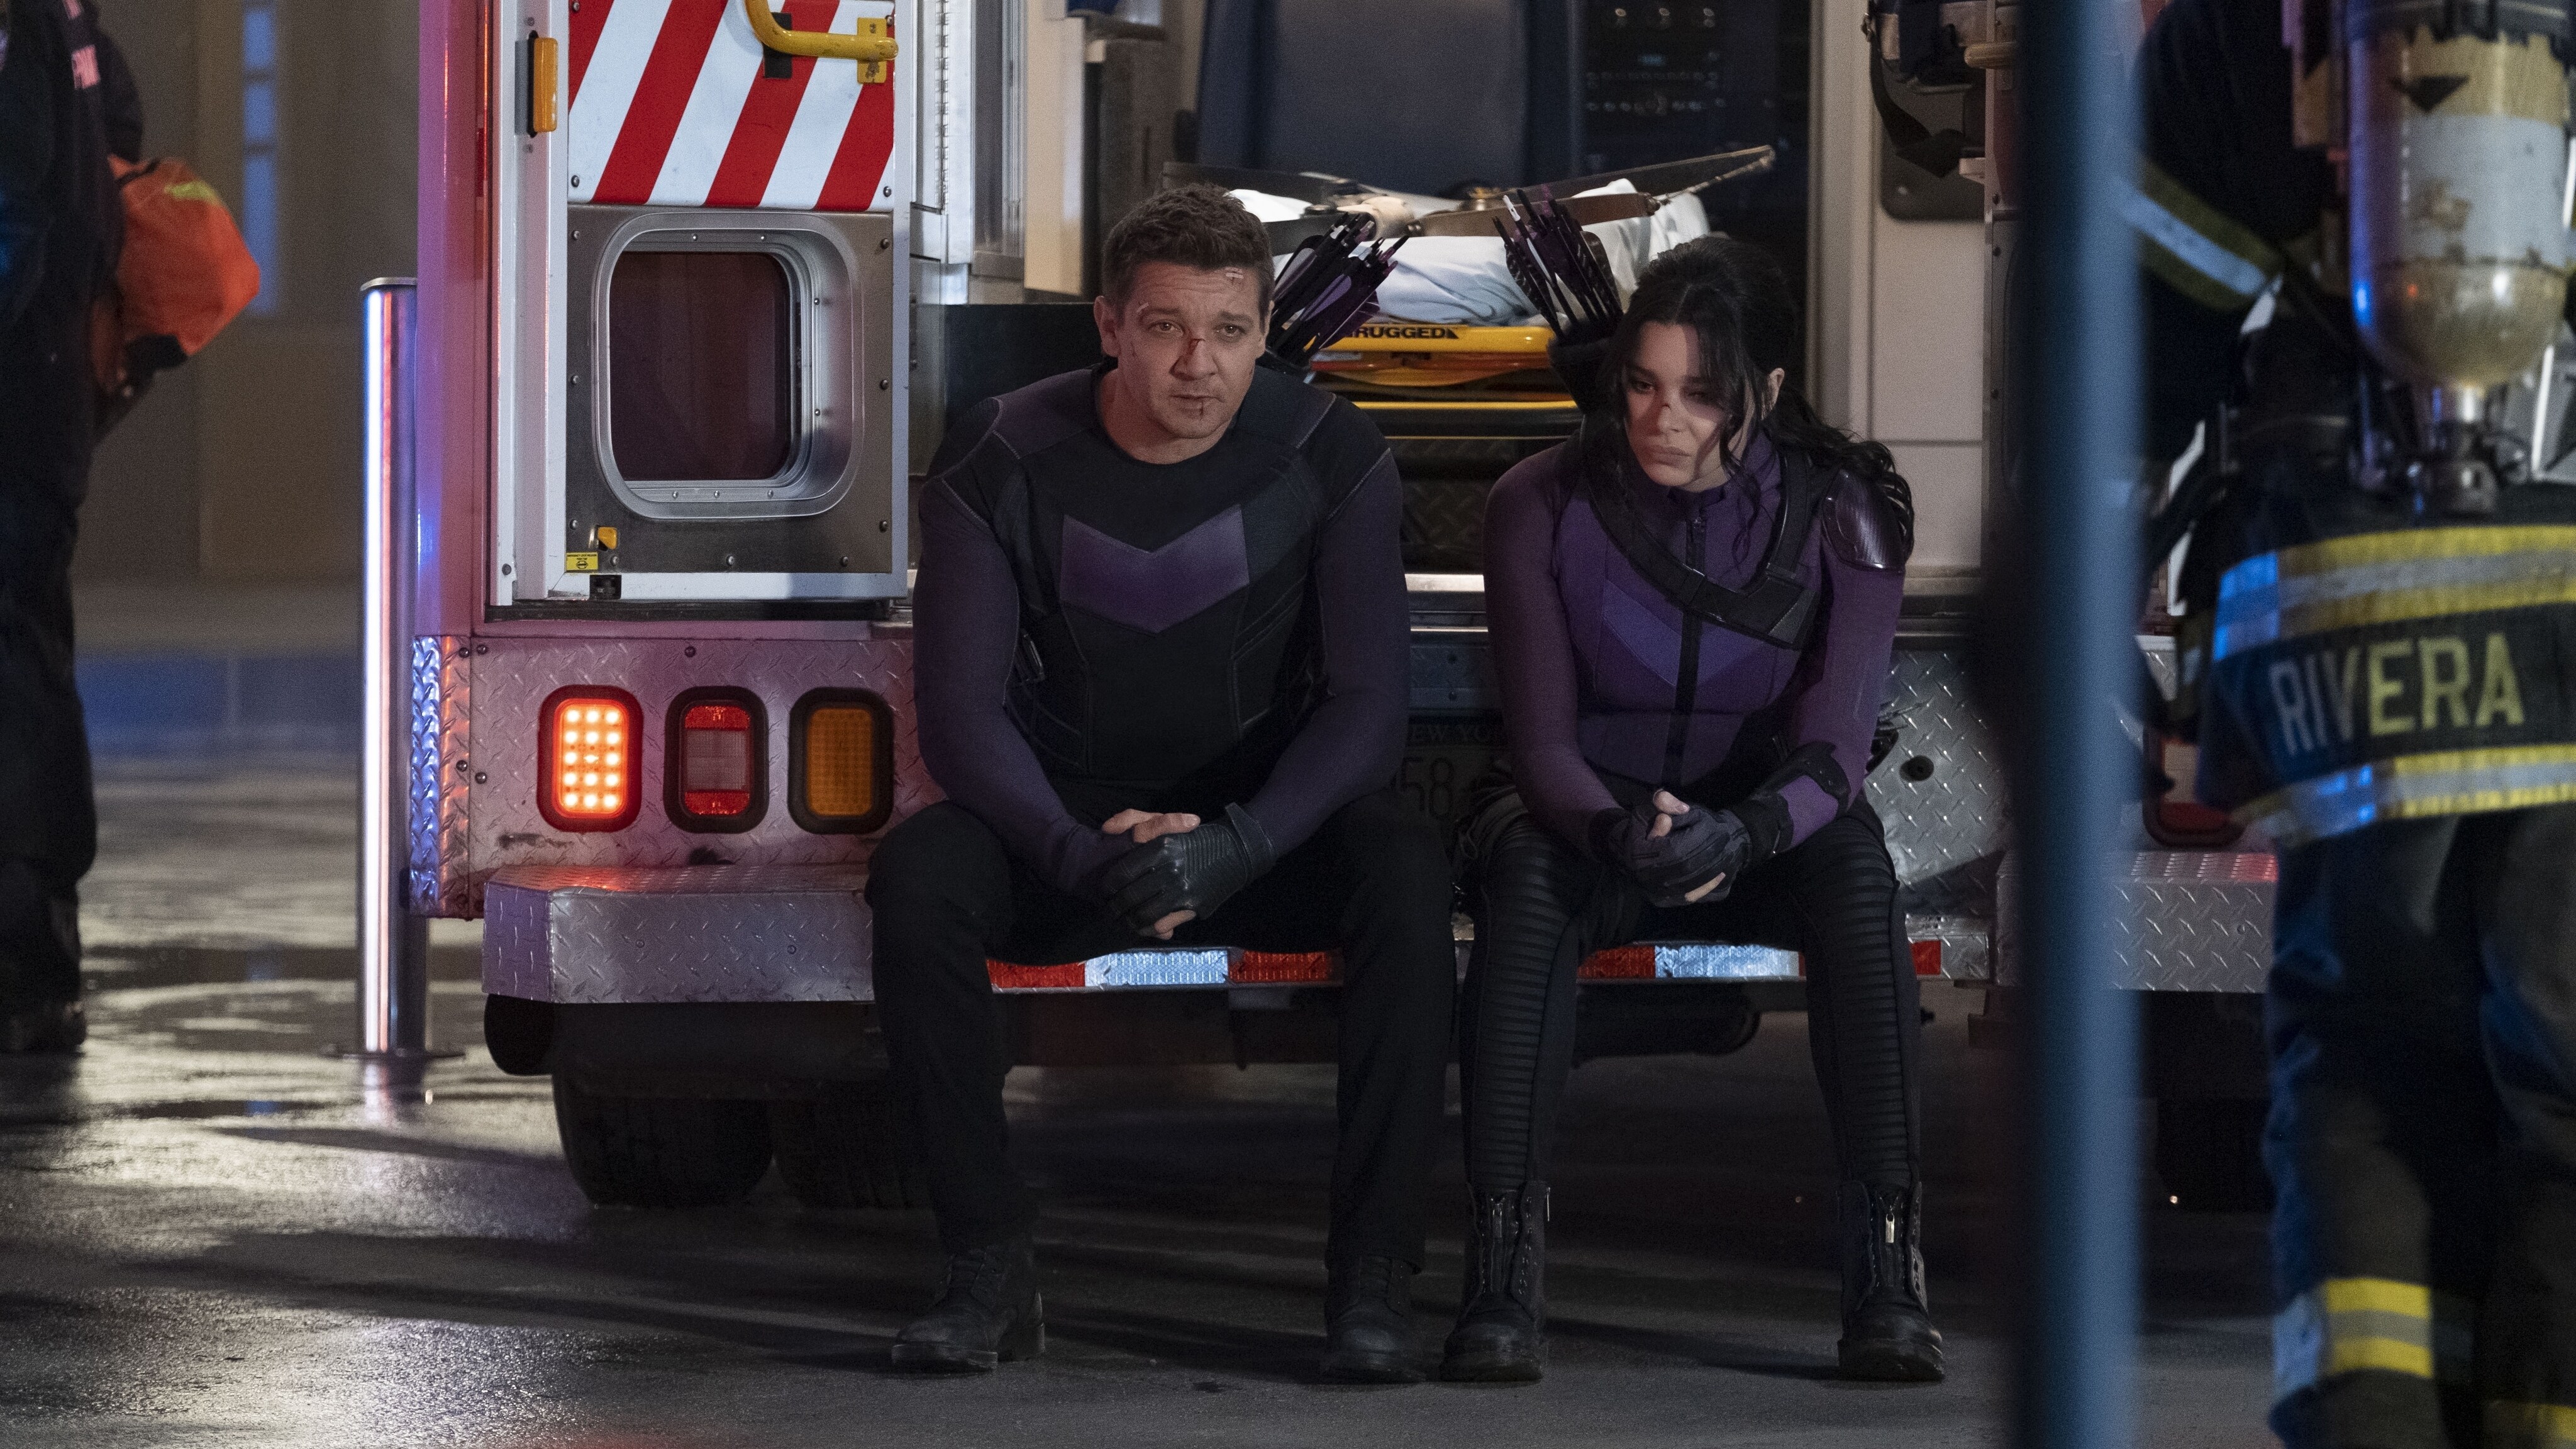 Jeremy Renner as Clint Barton/Hawkeye and Hailee Steinfeld as Kate Bishop in Marvel Studios' HAWKEYE. Photo by Chuck Zlotnick. ©Marvel Studios 2021. All Rights Reserved.